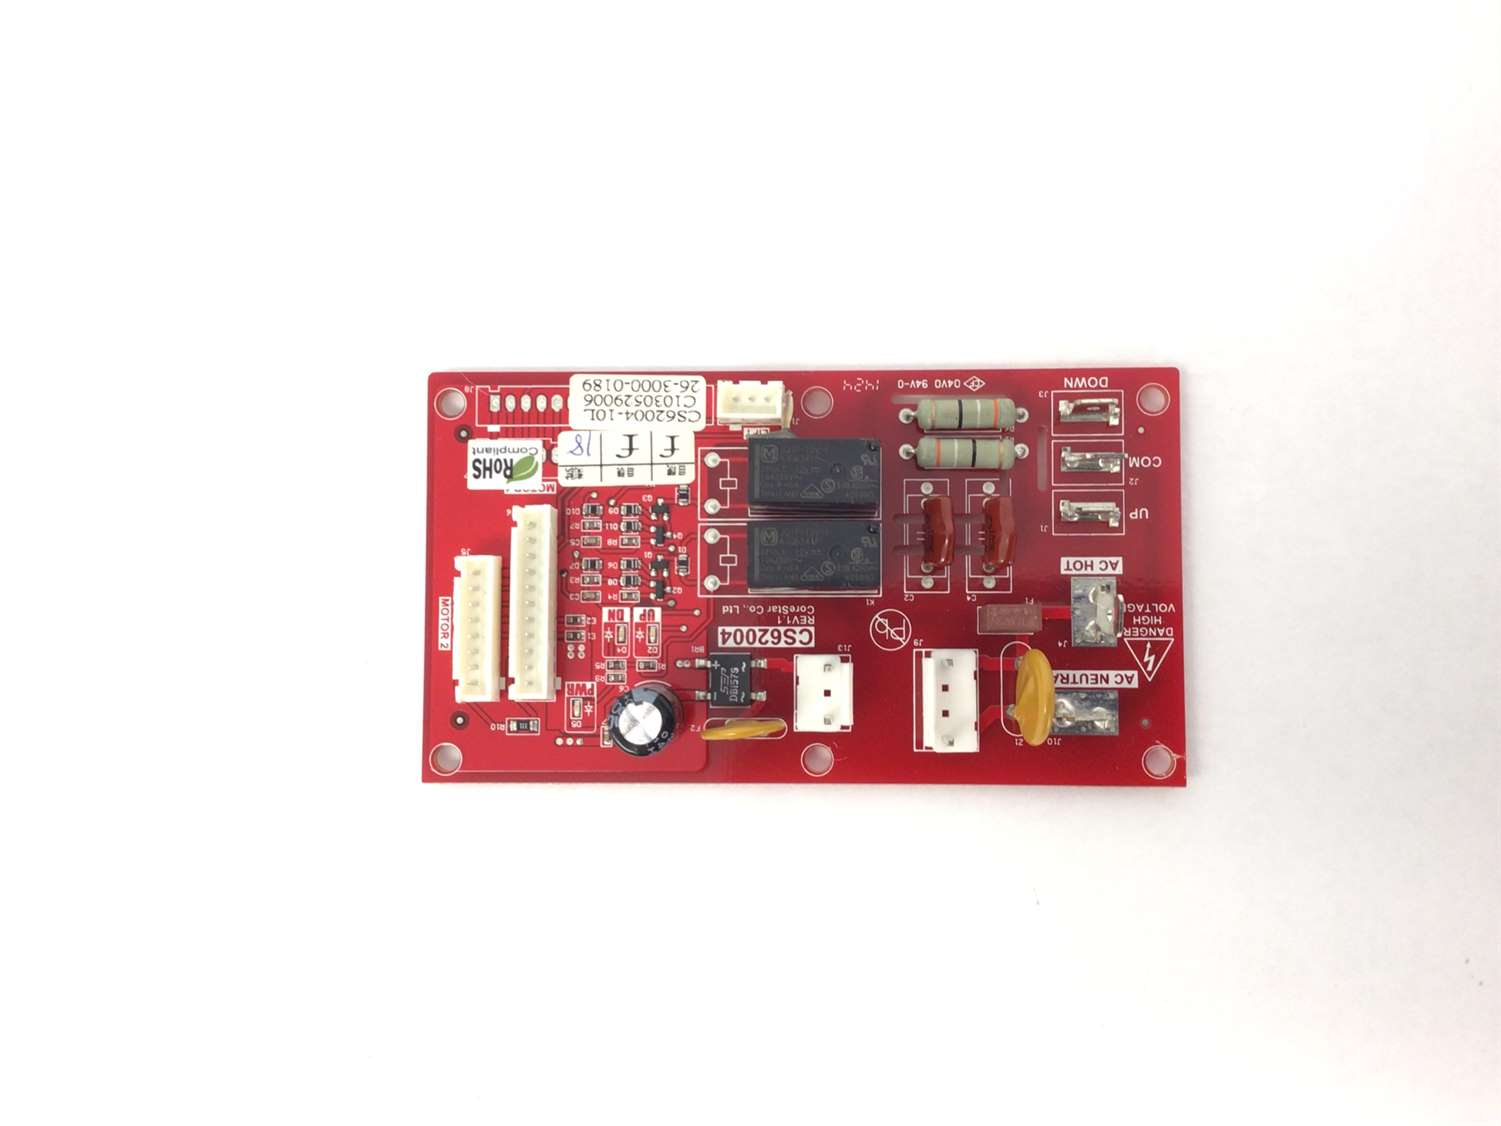 Incline Controller (CS62004) (Used)